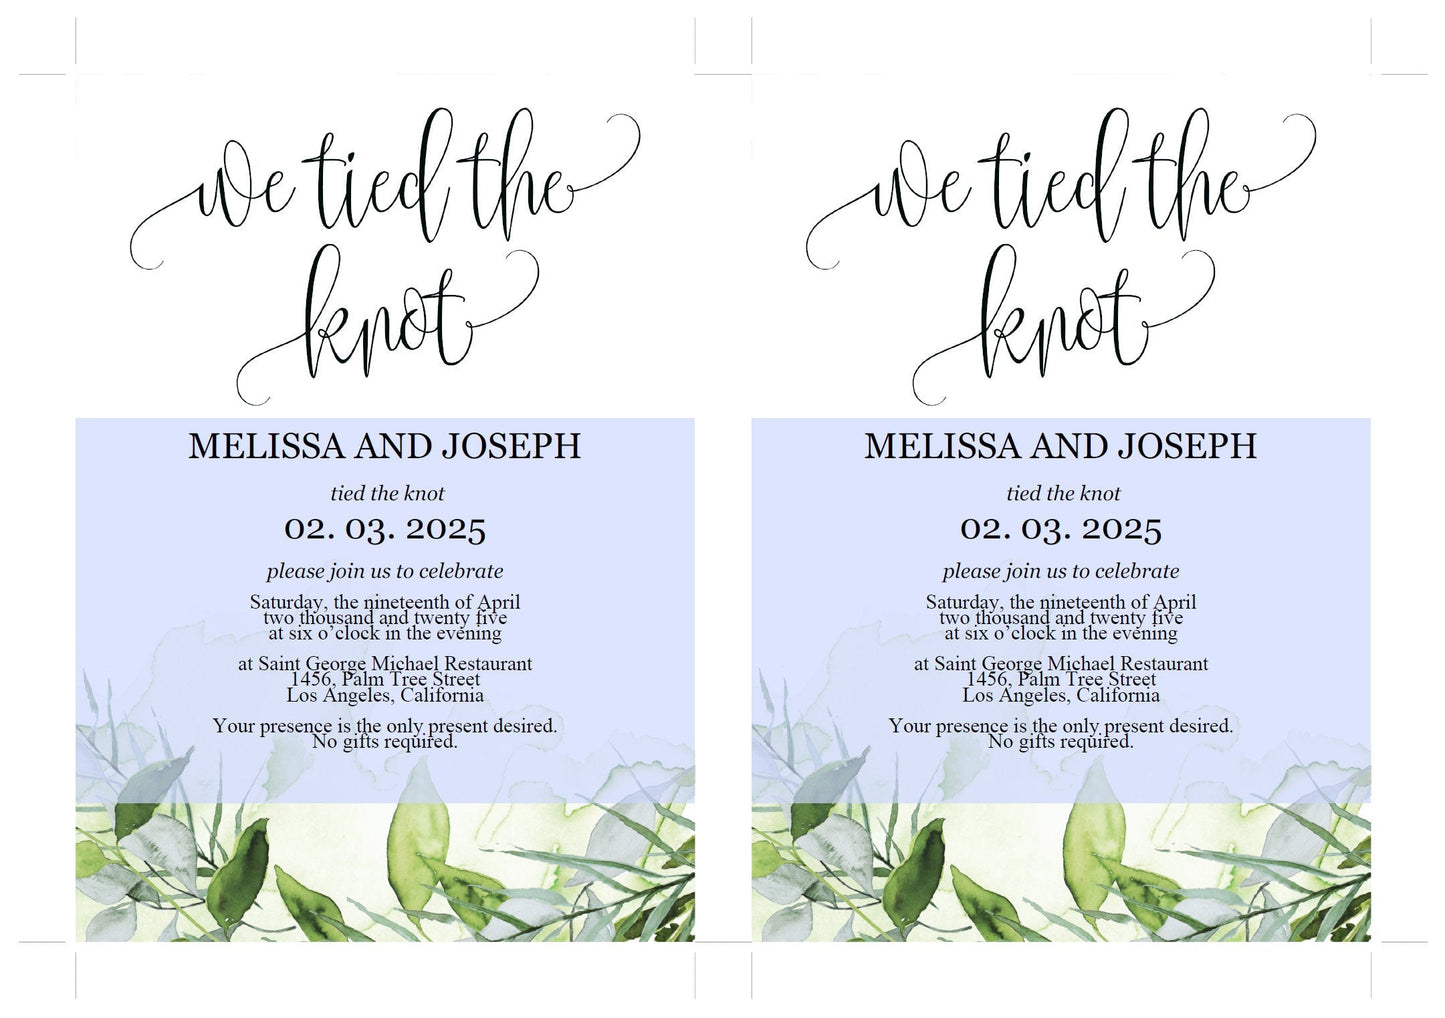 We tied the knot Wedding Invitation Template, Editable,Printable, Calligraphy,Greenery,Wedding Announcement,Elopement,we eloped - Melissa ELOPEMENT SAVVY PAPER CO